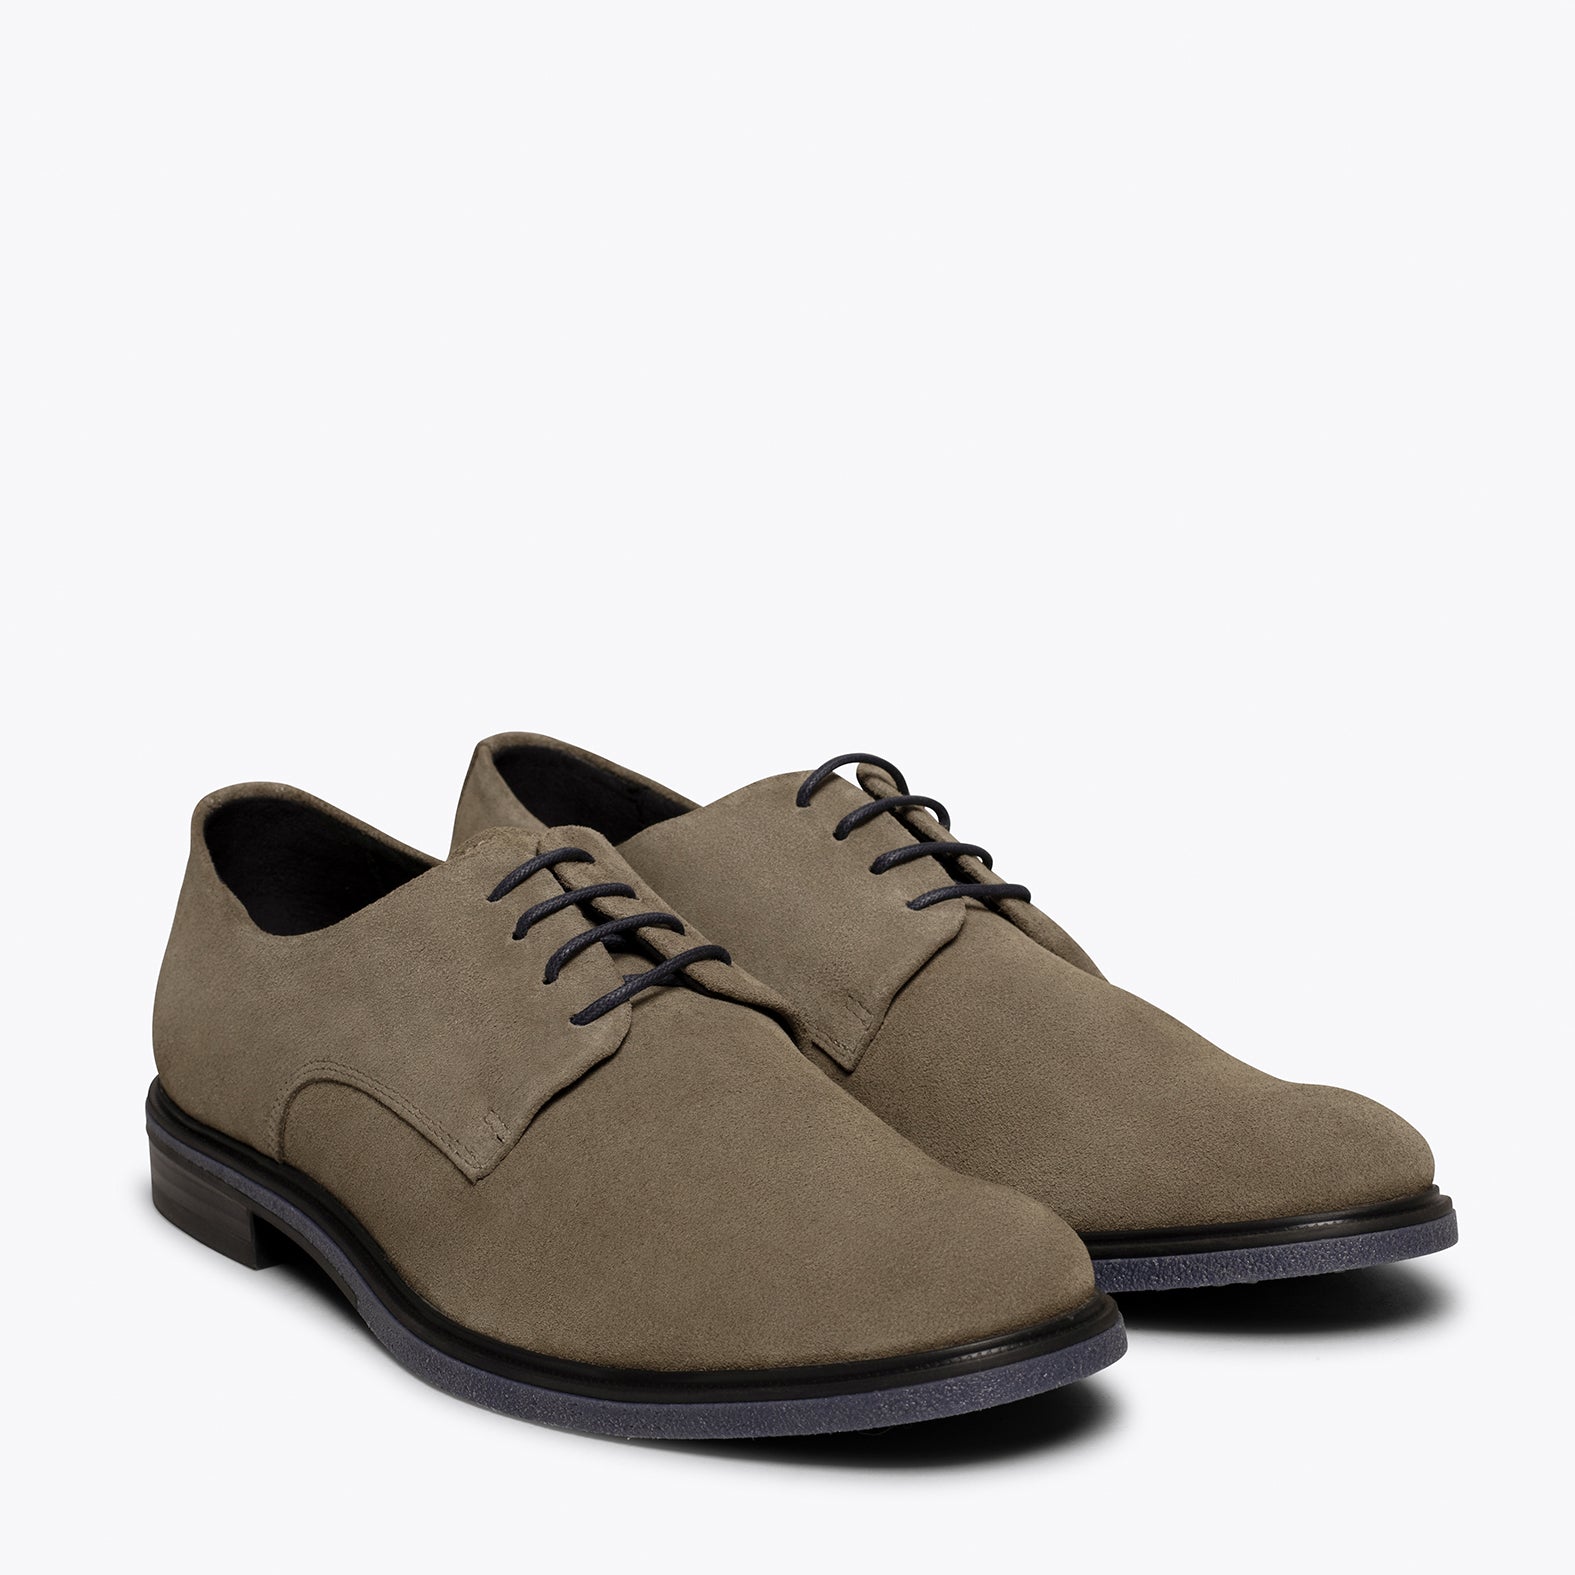 HARVARD - Chaussure pour homme TAUPE hydrofuge